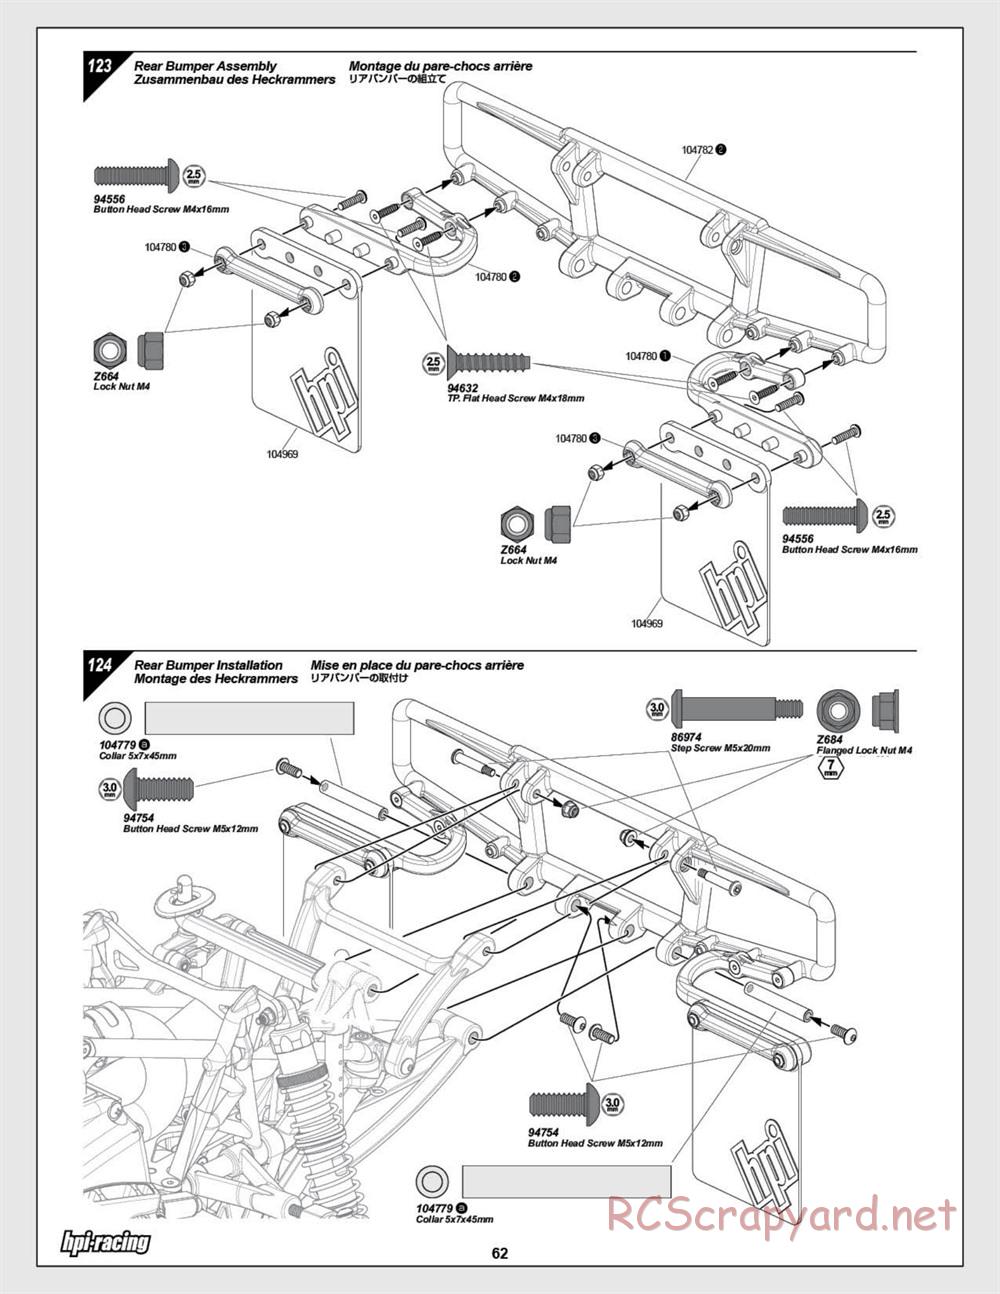 HPI - Baja 5SC SS - Exploded View - Page 62